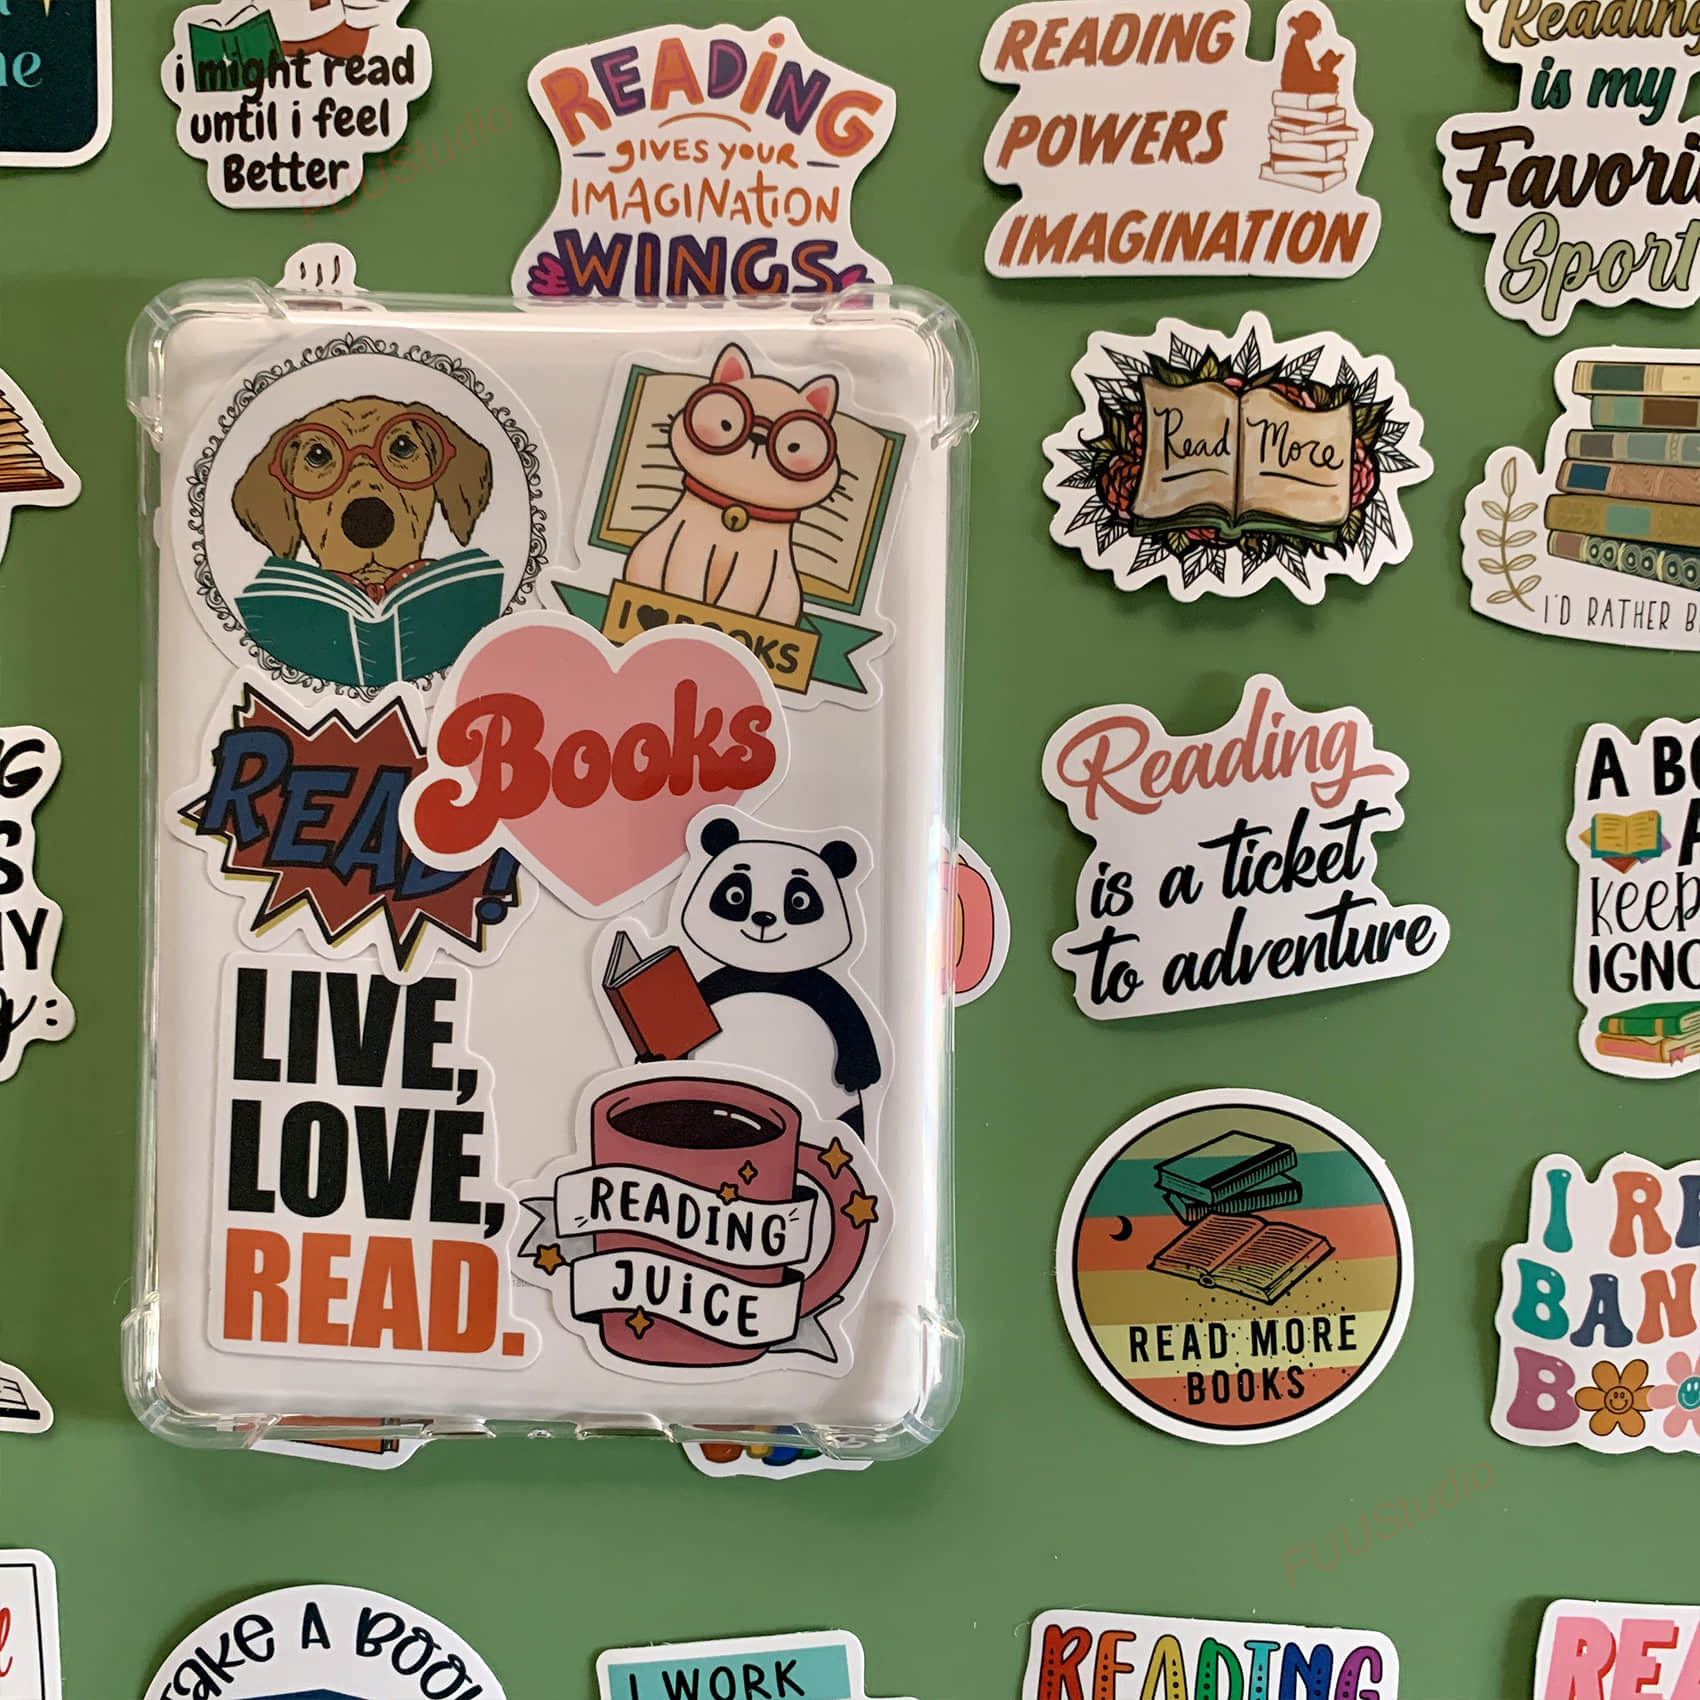 Reading and Books Sticker Pack 50 pieces-FUU Studio